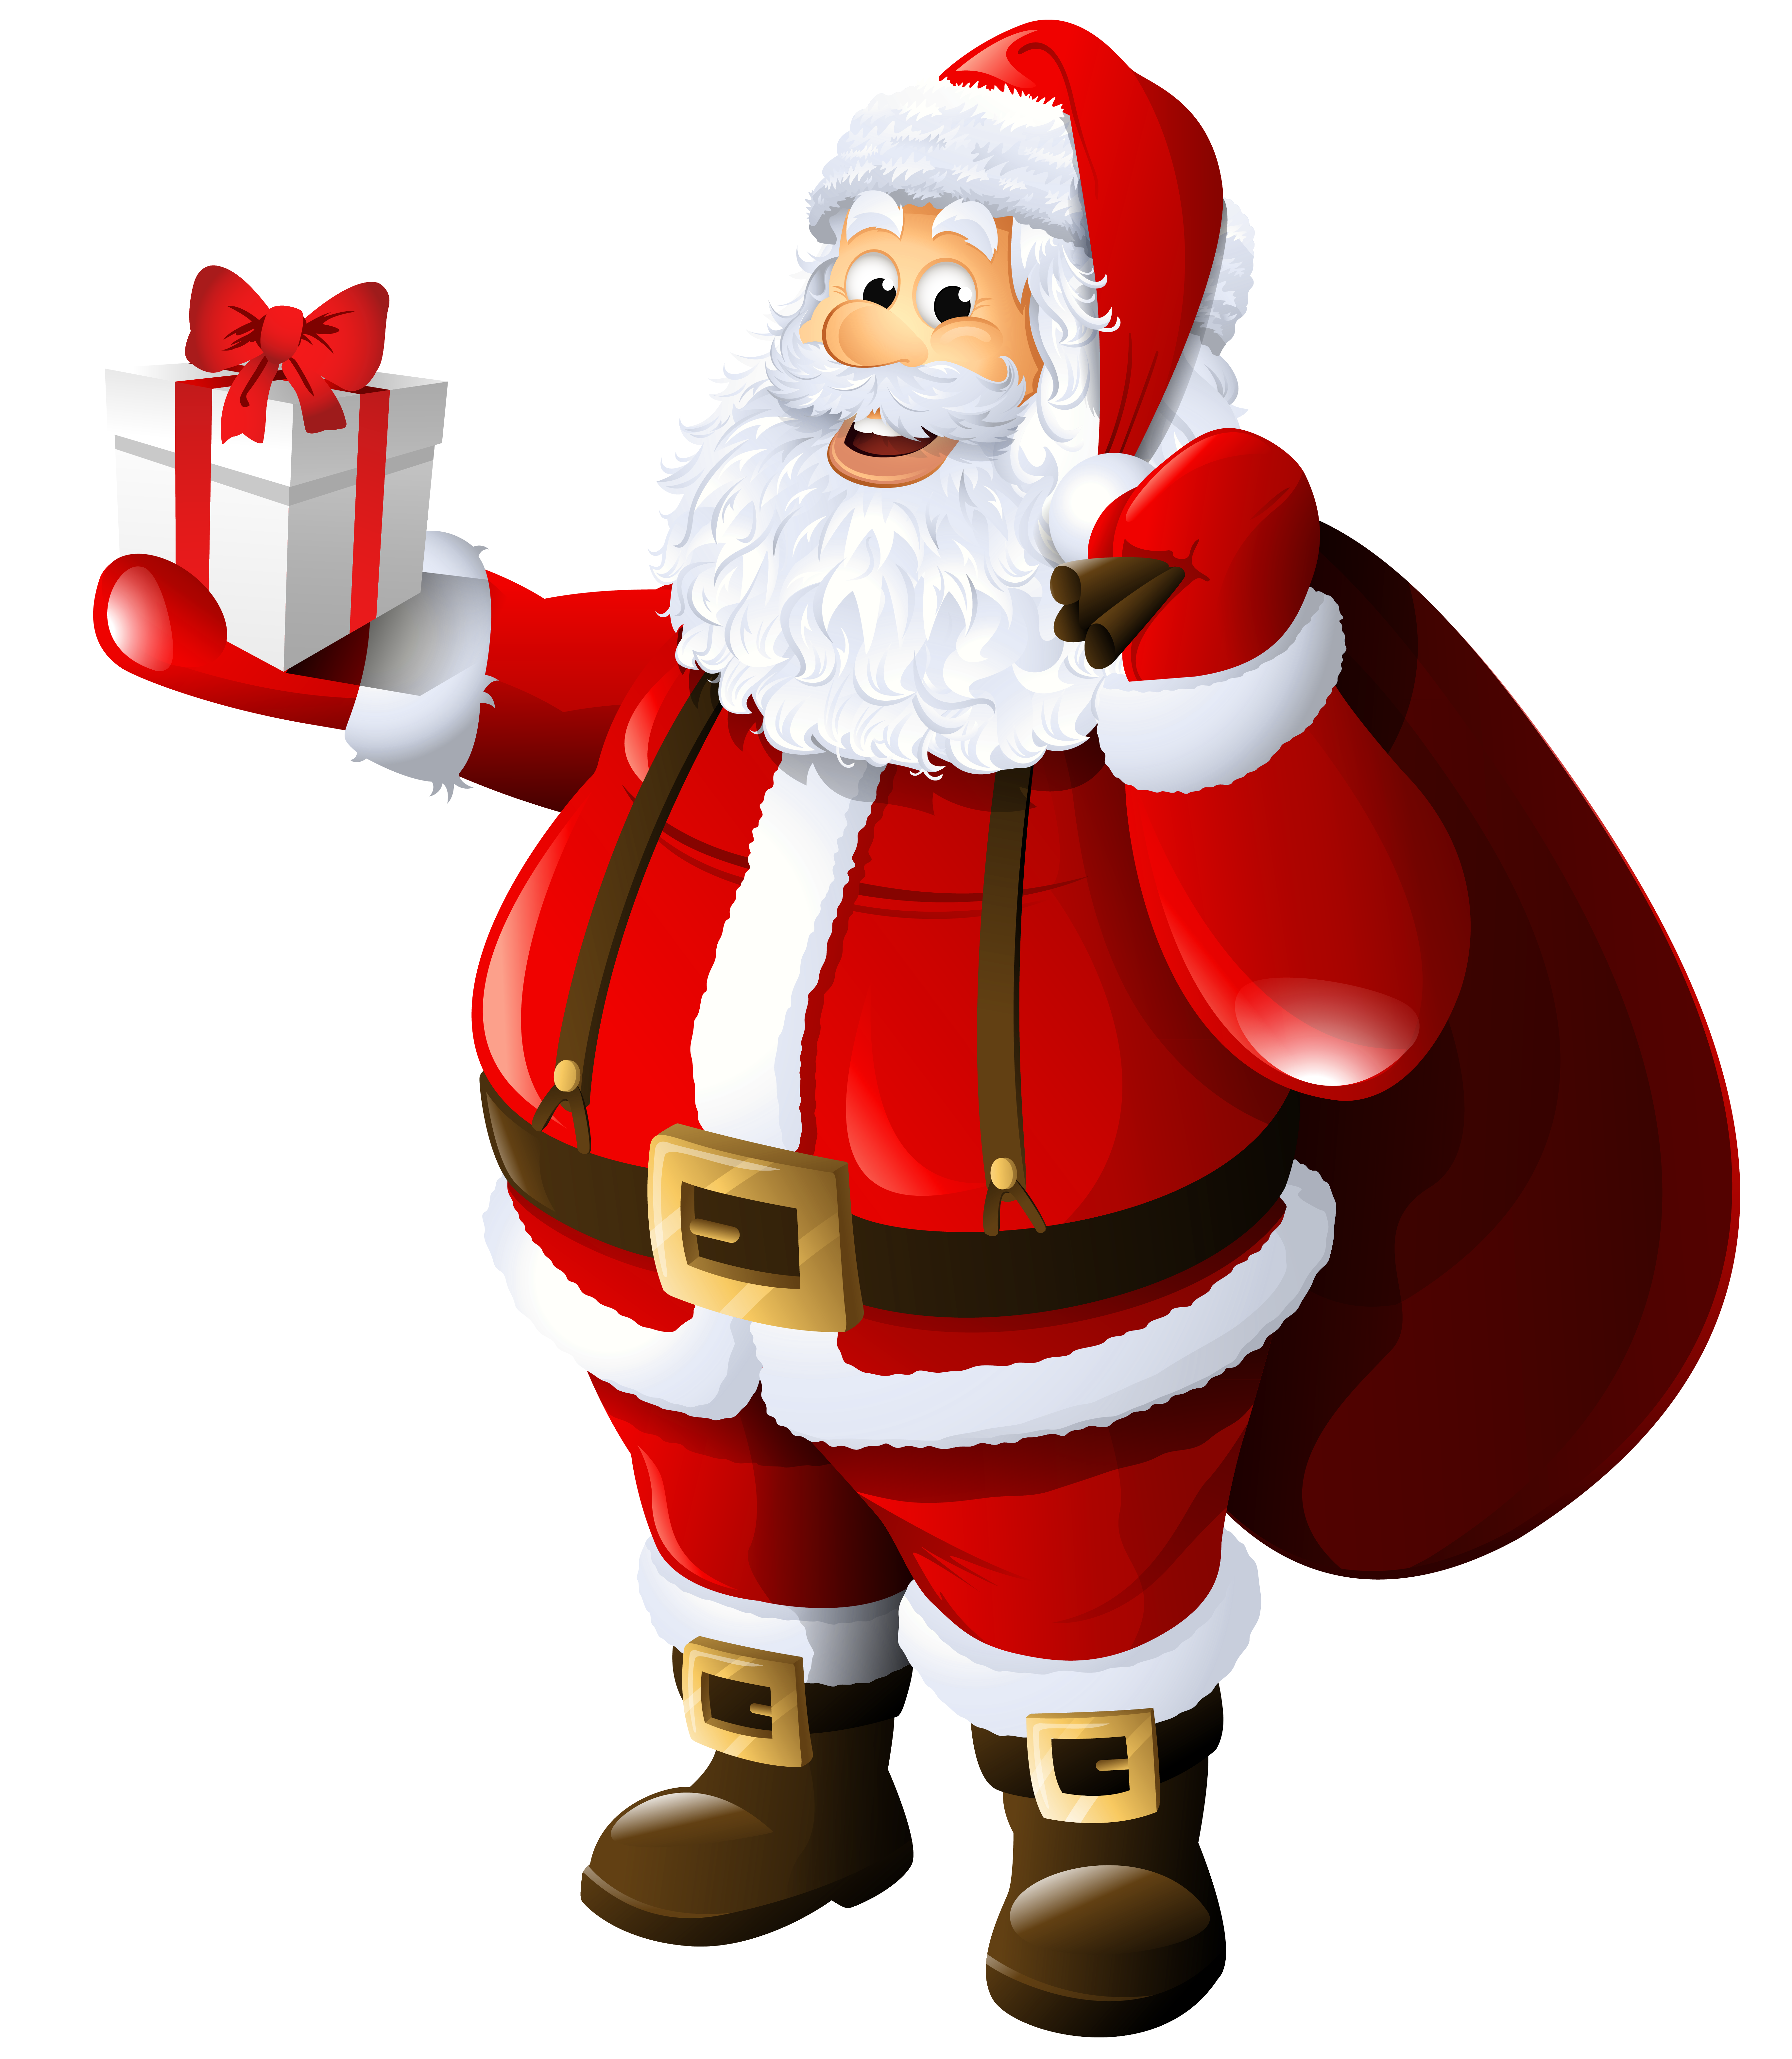 Transparent_Santa_Claus_with_Gift_and_Bag.png?m=1415458560